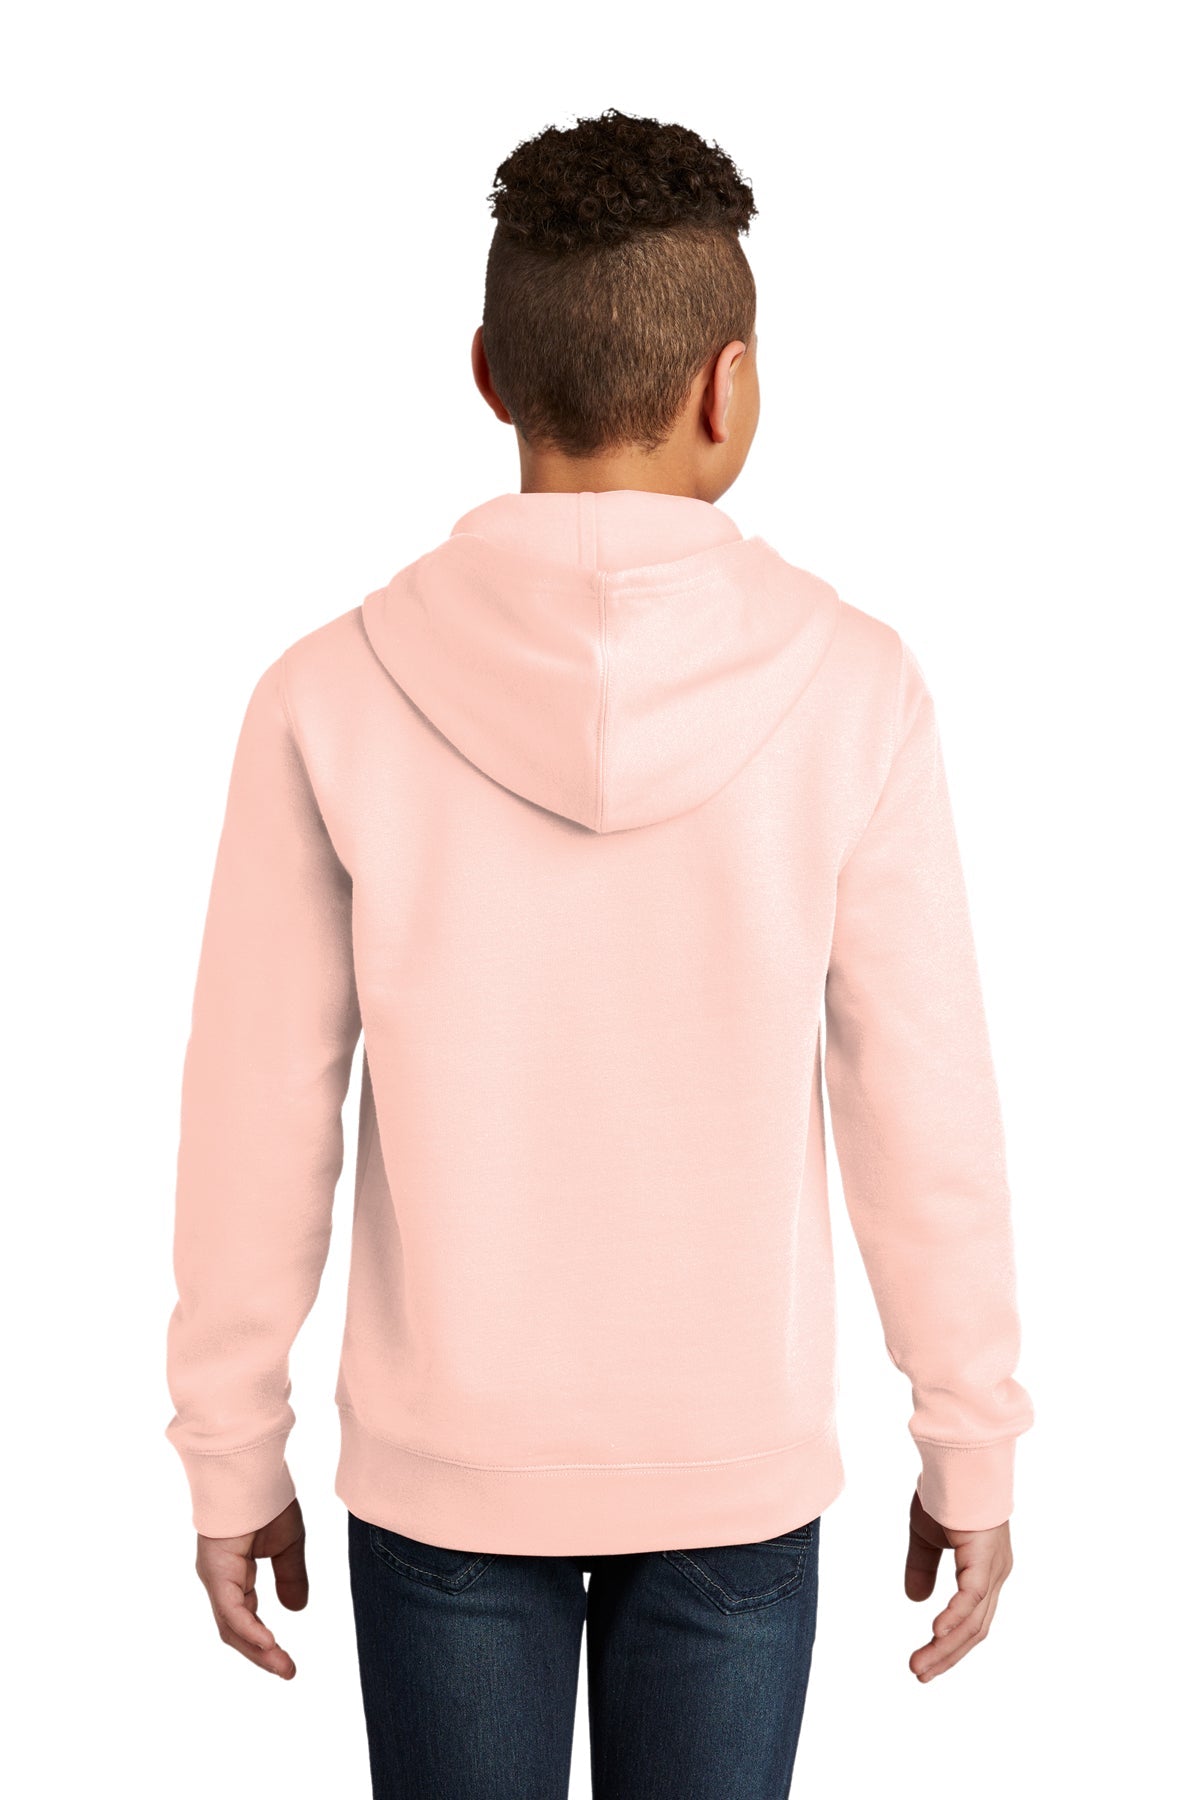 DT6100Y District® Youth V.I.T.™ Fleece Hoodie